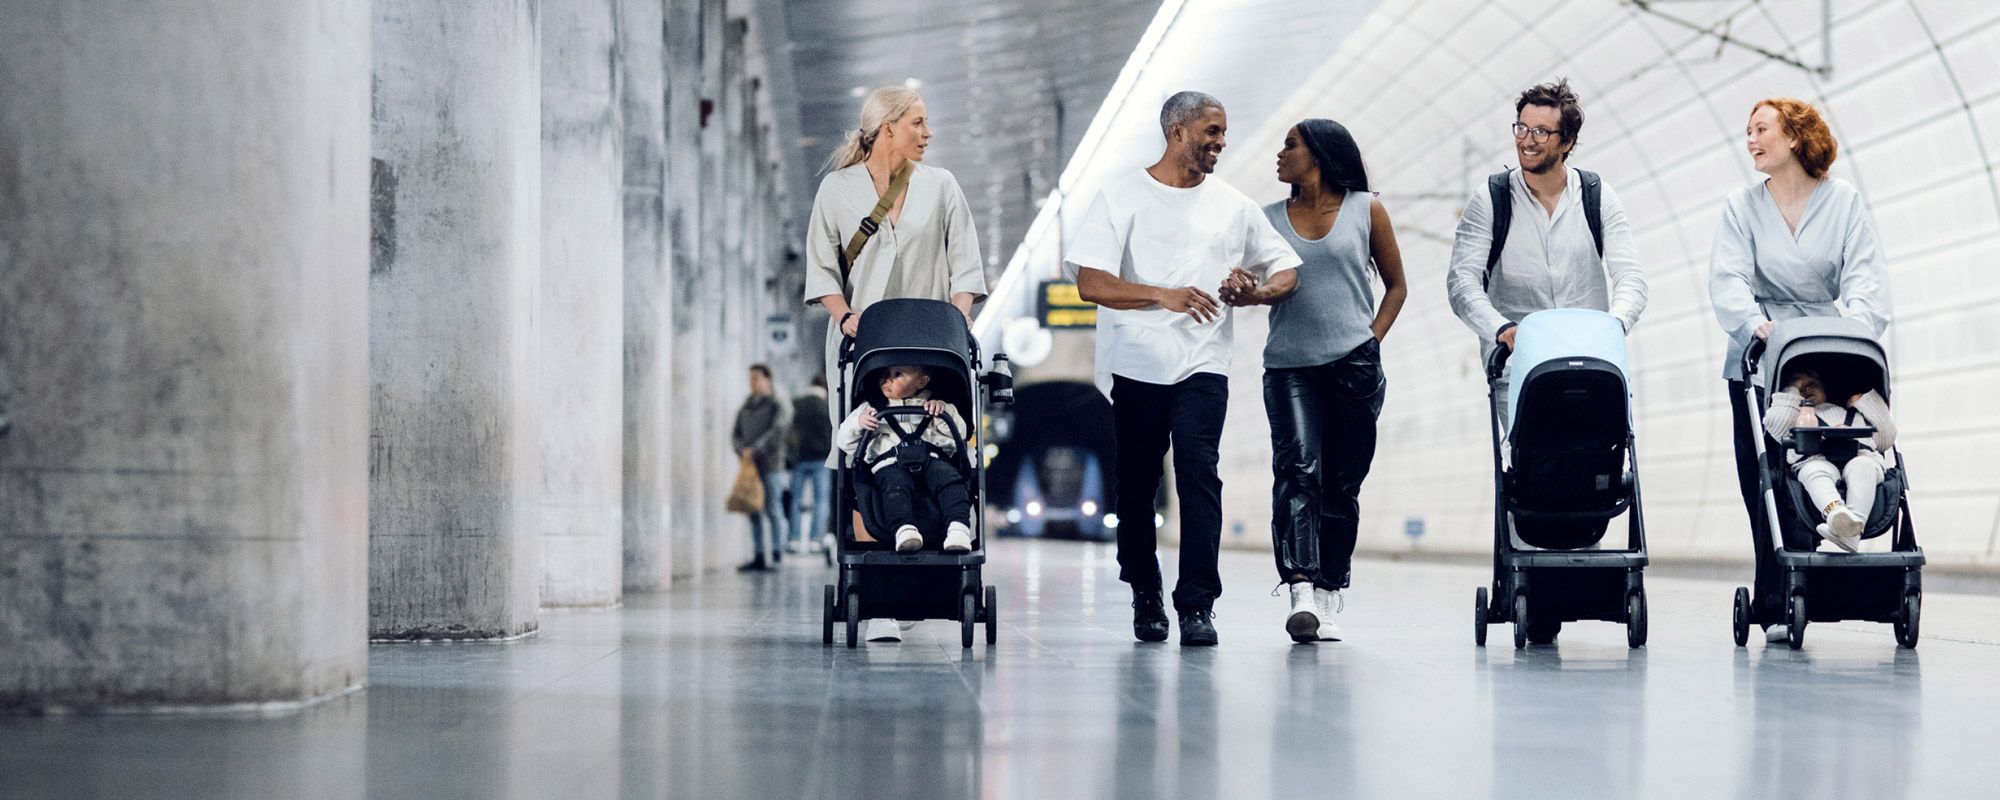 A group of parents at a train station push their children in Thule Shine strollers.